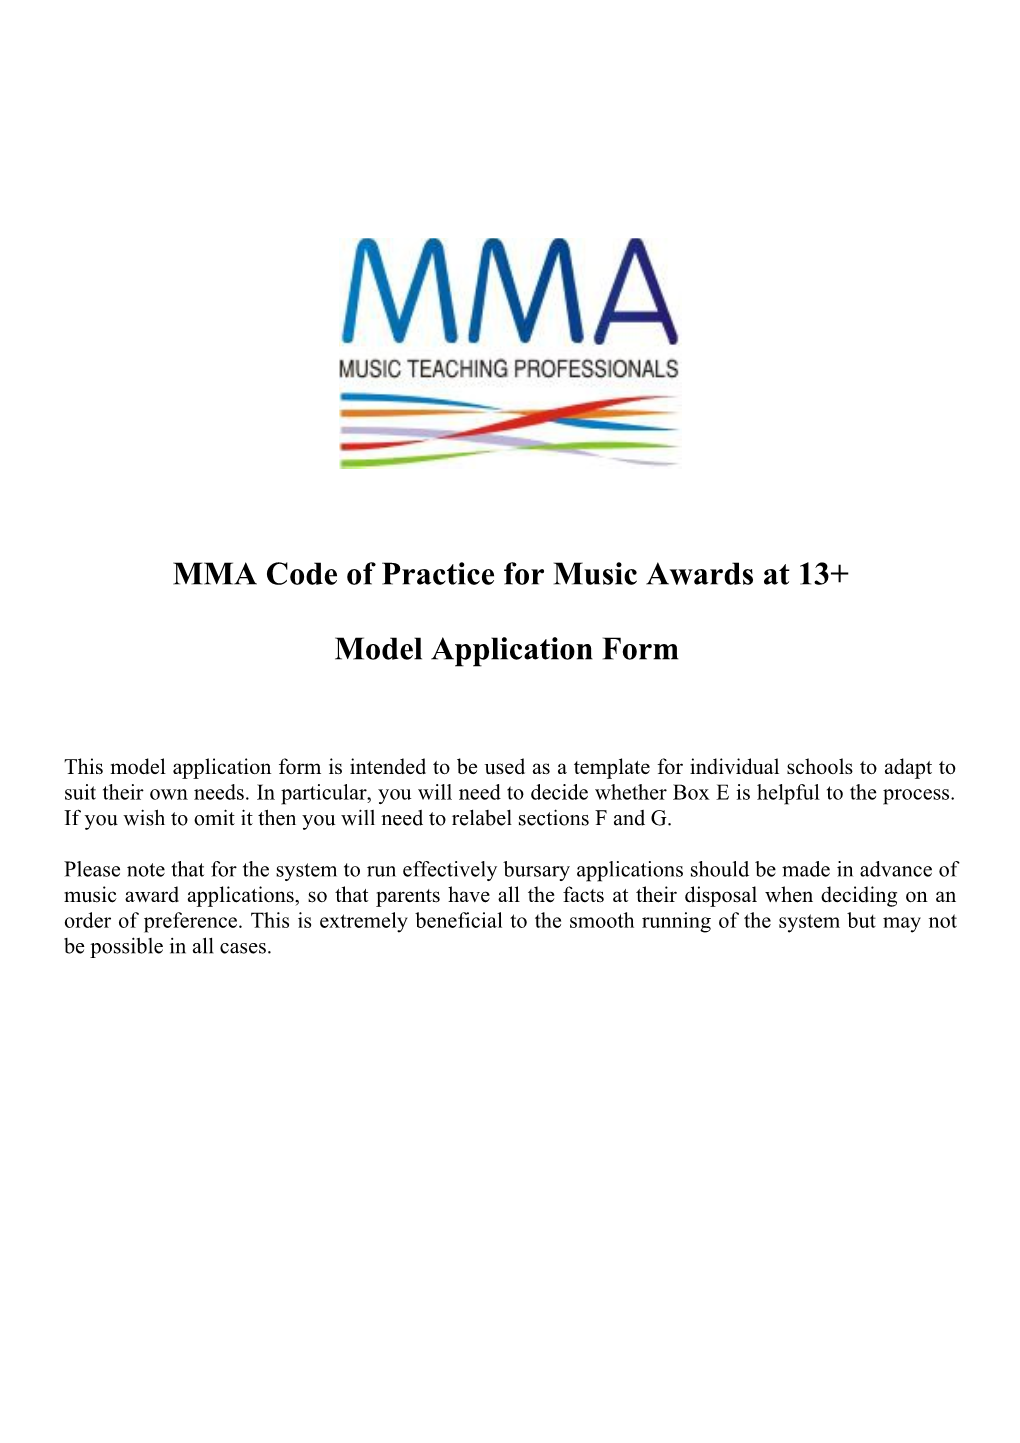 MMA Code of Practice for Music Awards at 13+